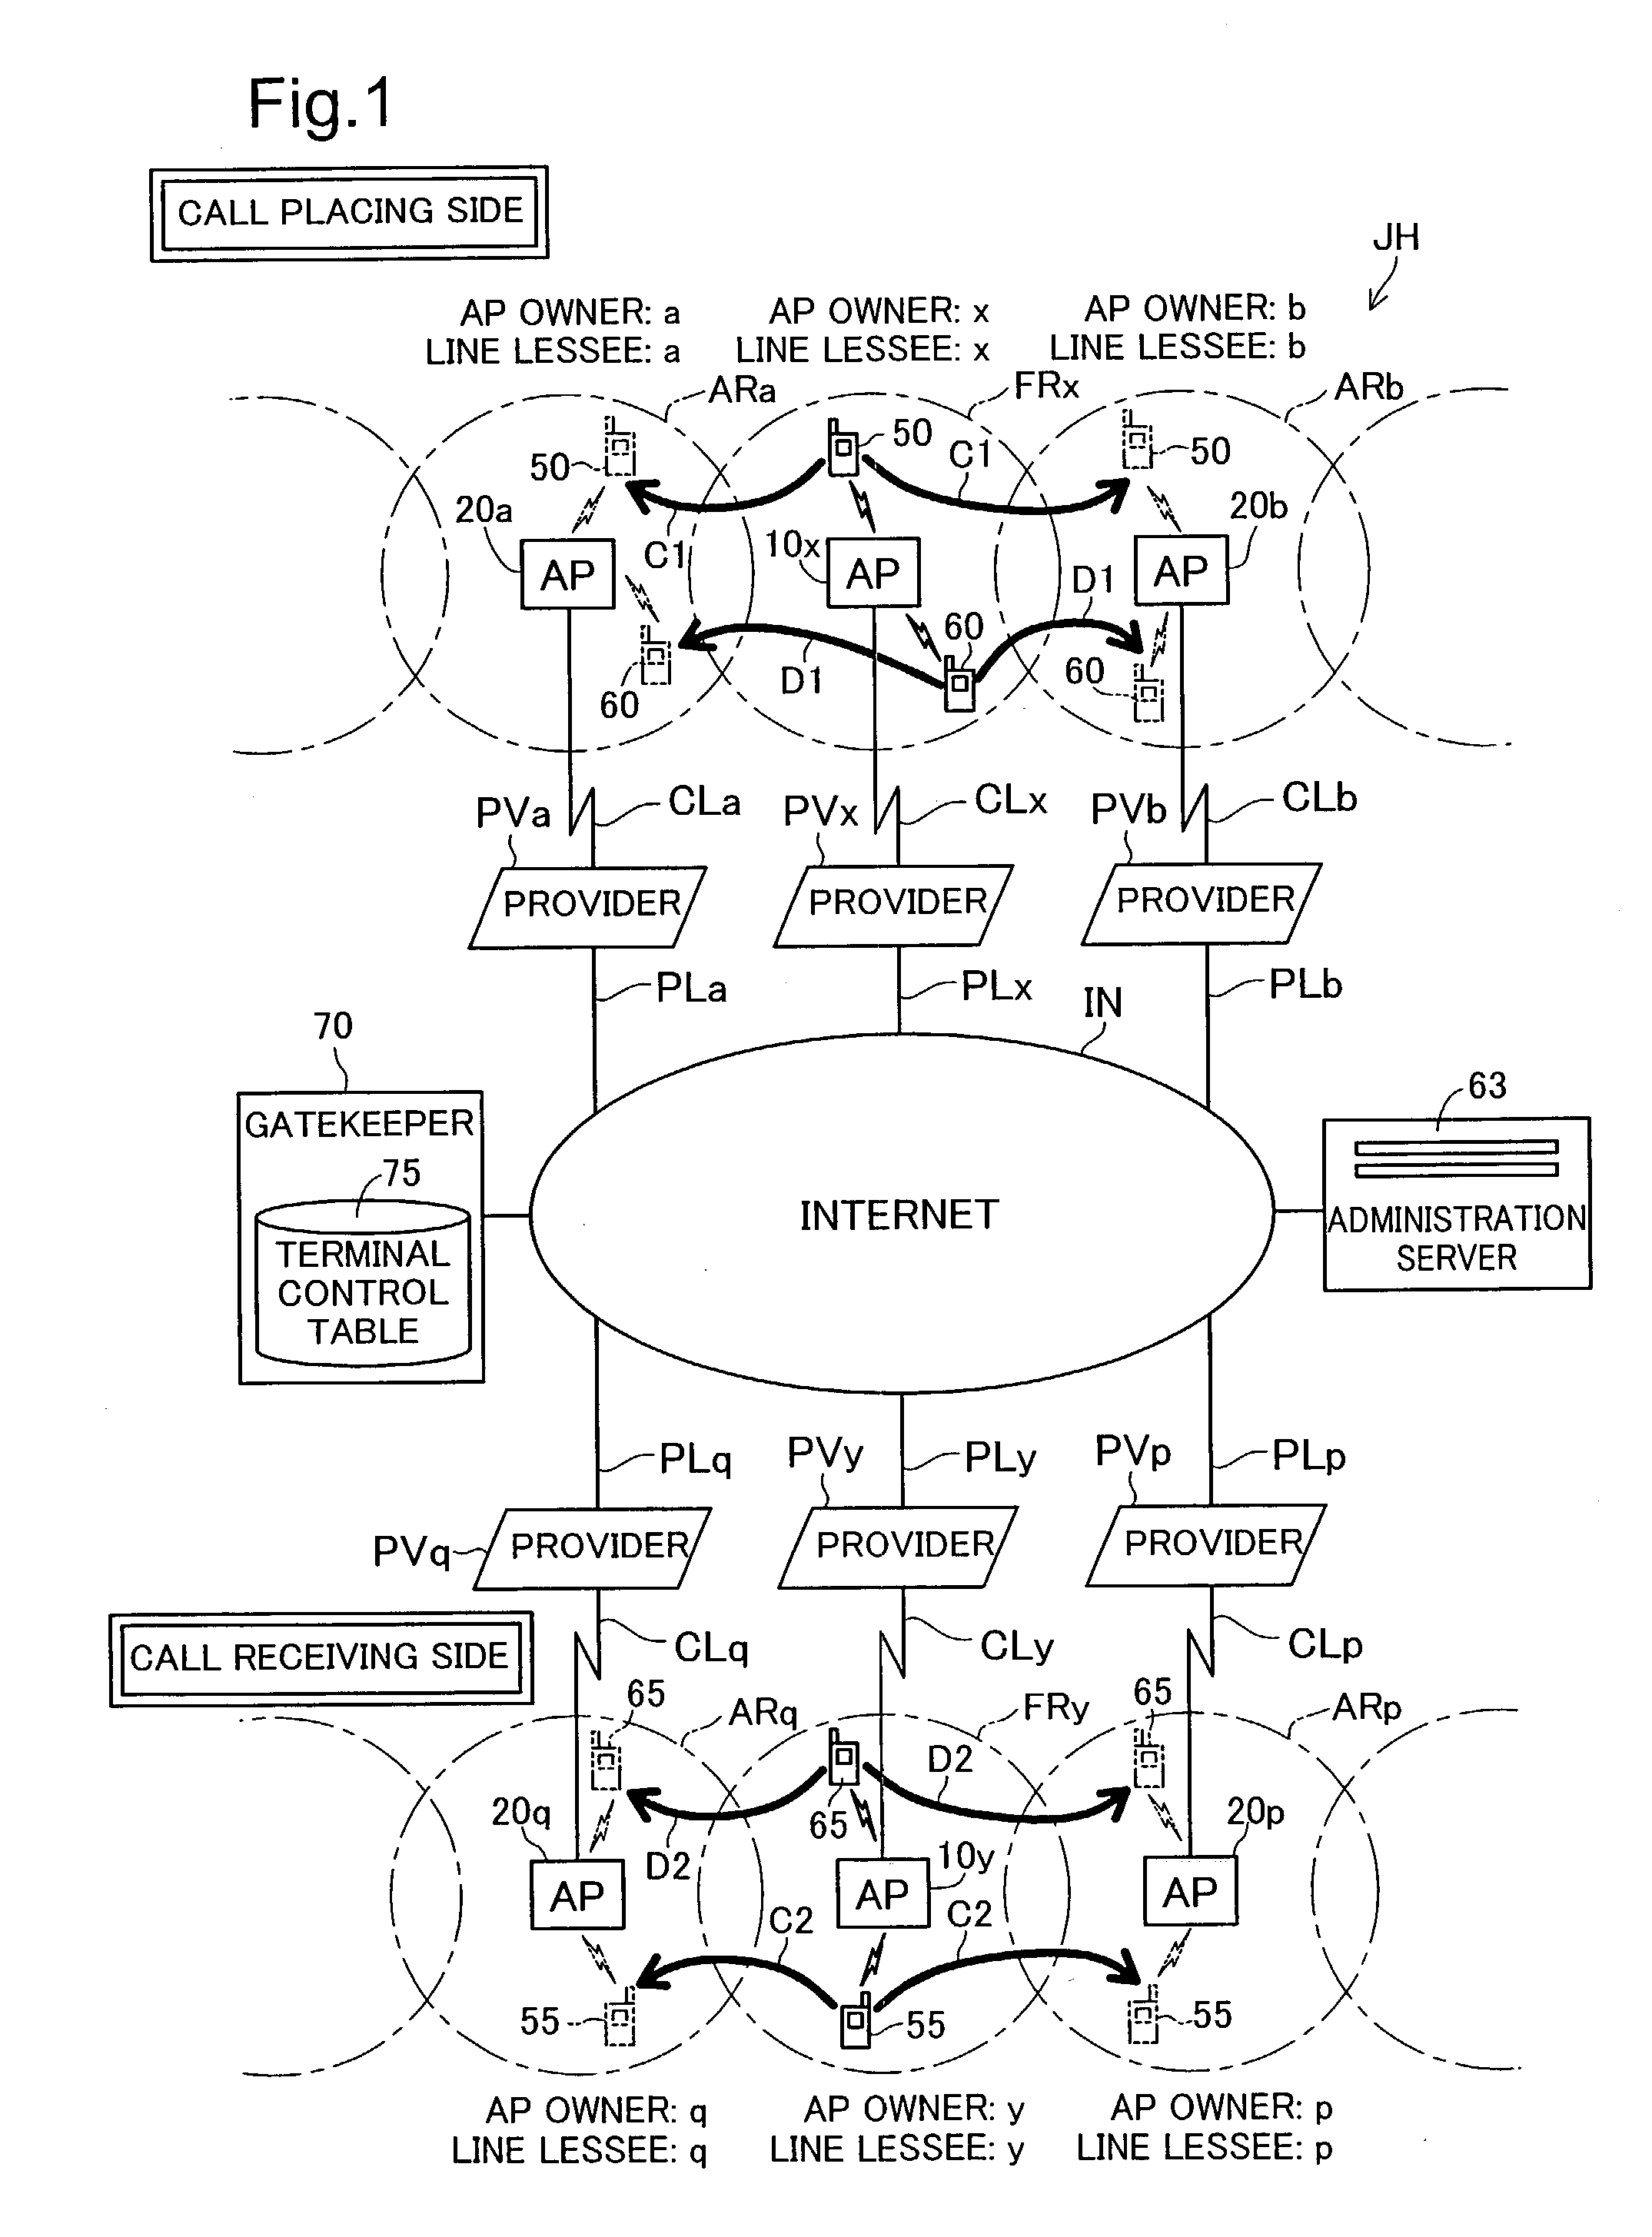 Method for providing voice communication services and system for the same